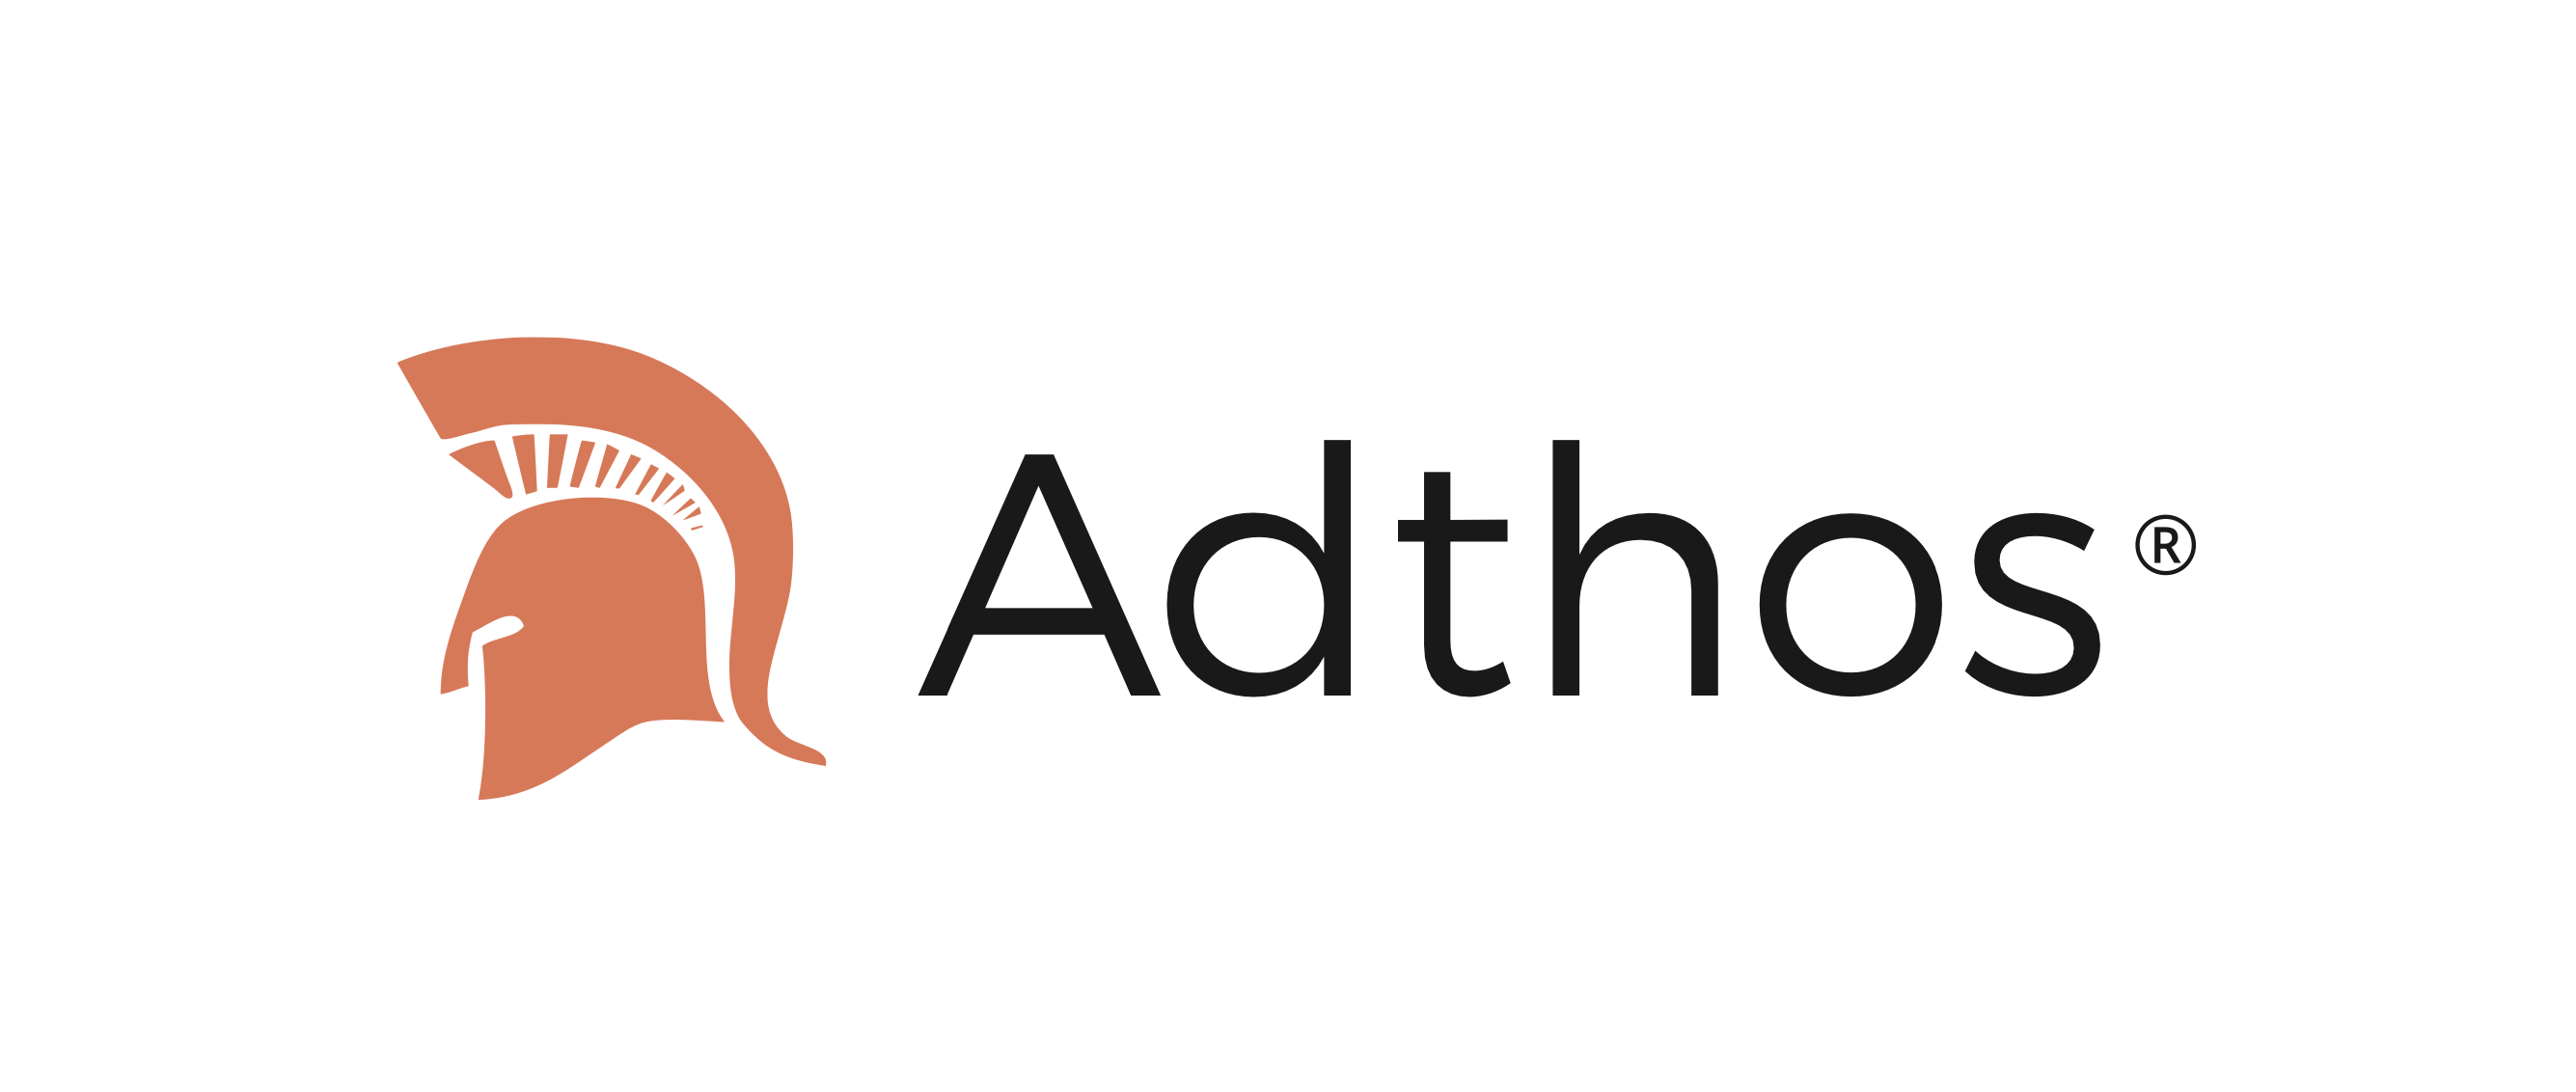 Image: Adthos is flipping the script on audio advertising